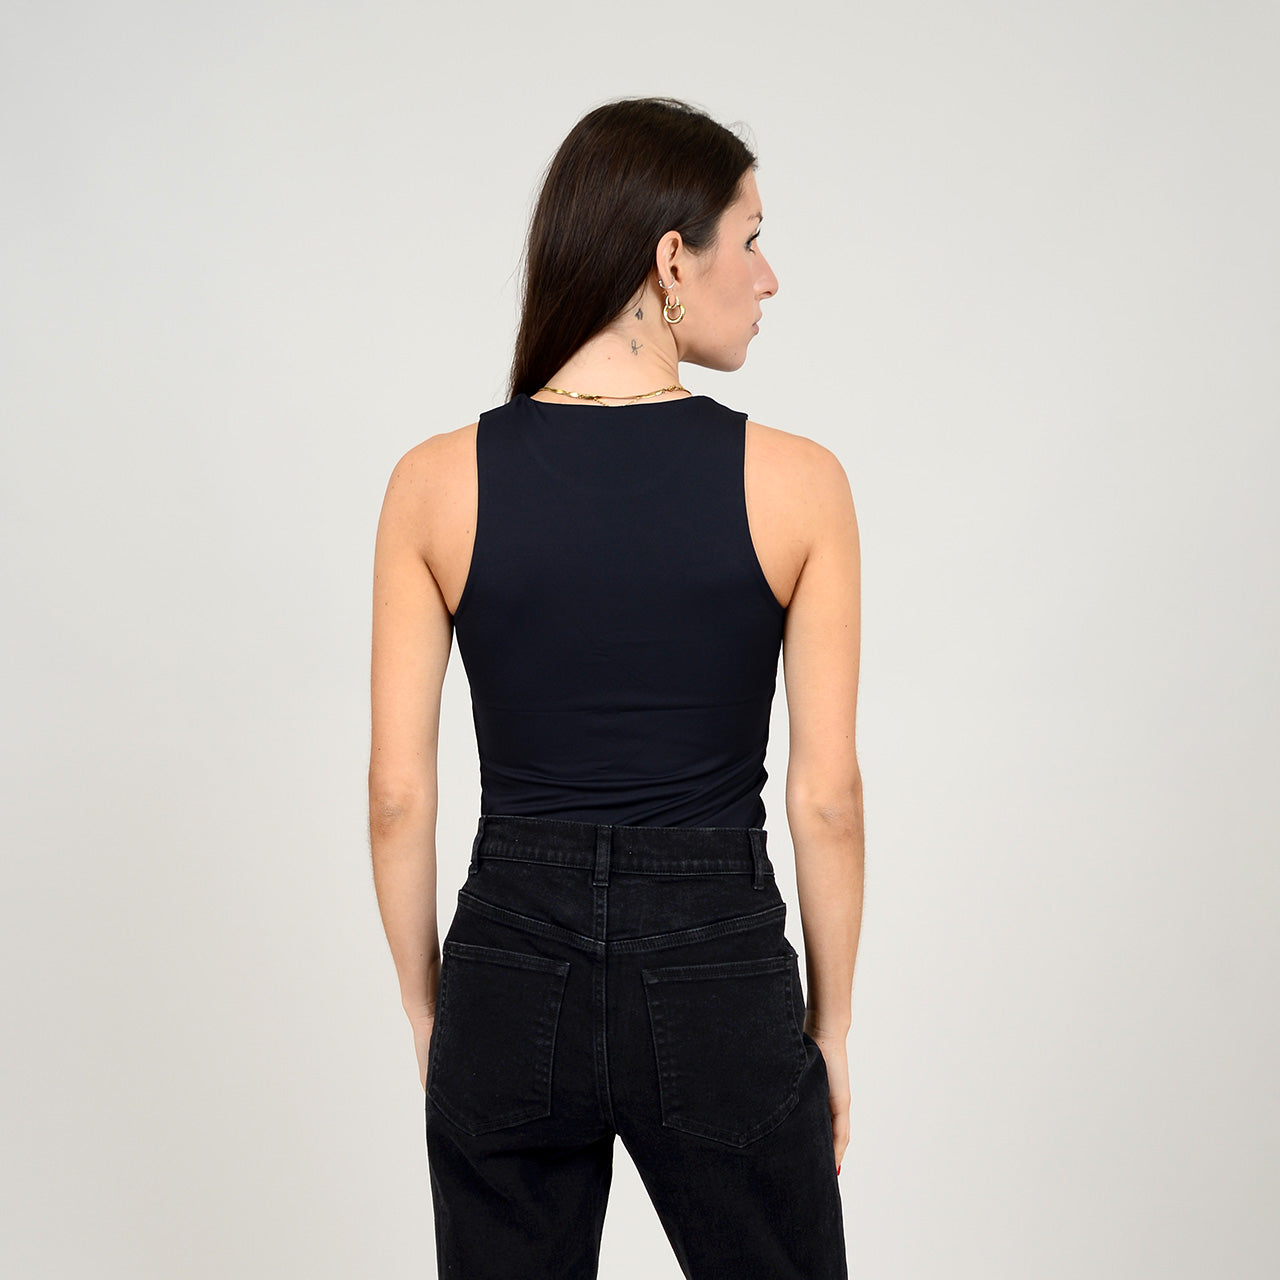 Camisole - Maria muscle